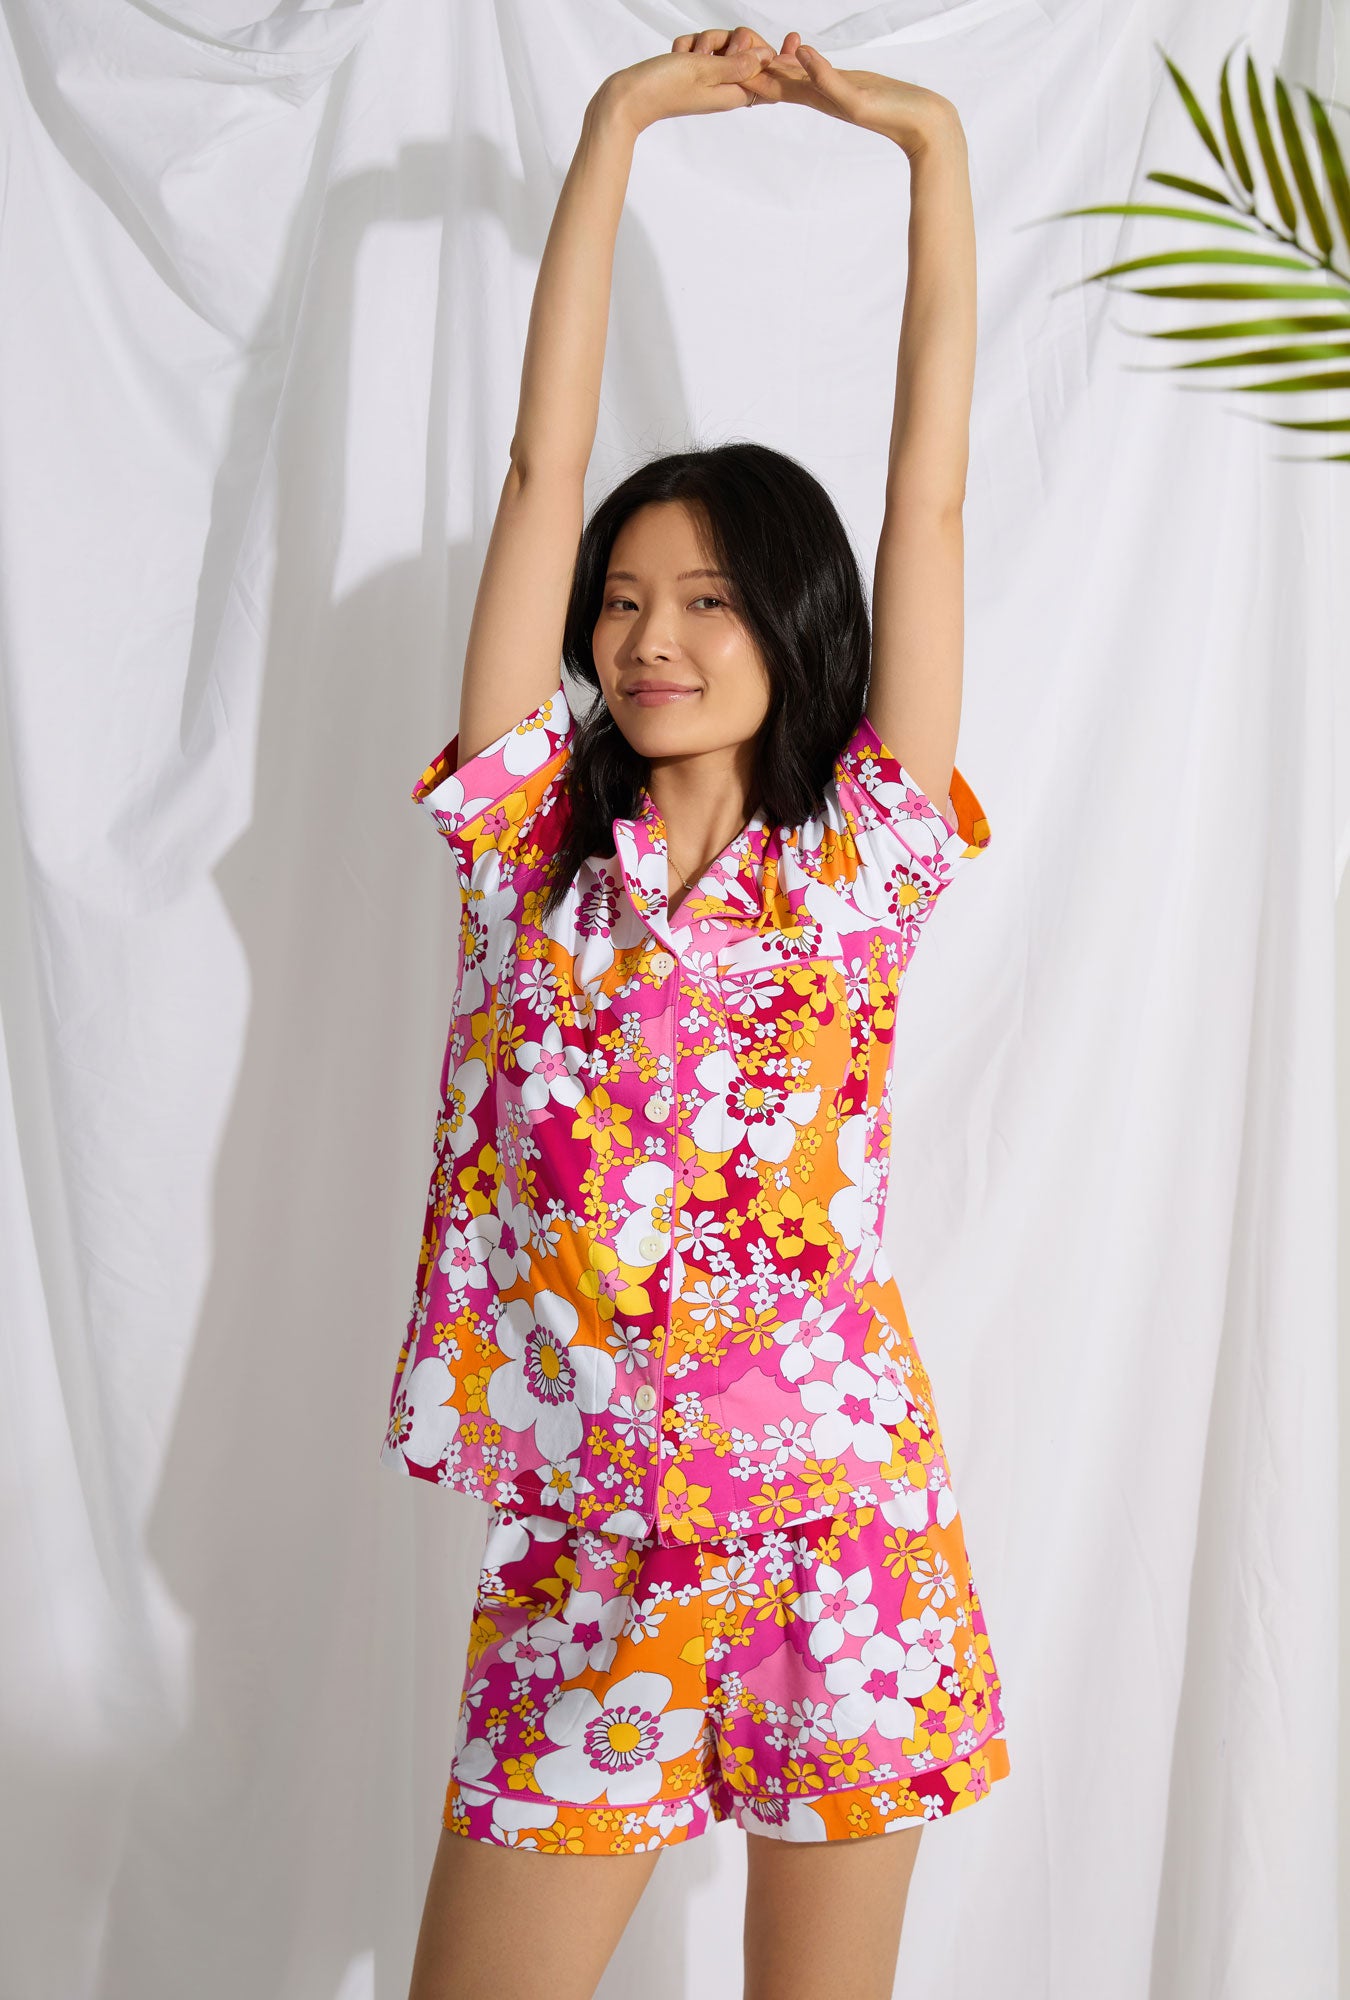 A lady wearing short sleeve classic shorty stretch jersey pj set with bali pink floral print